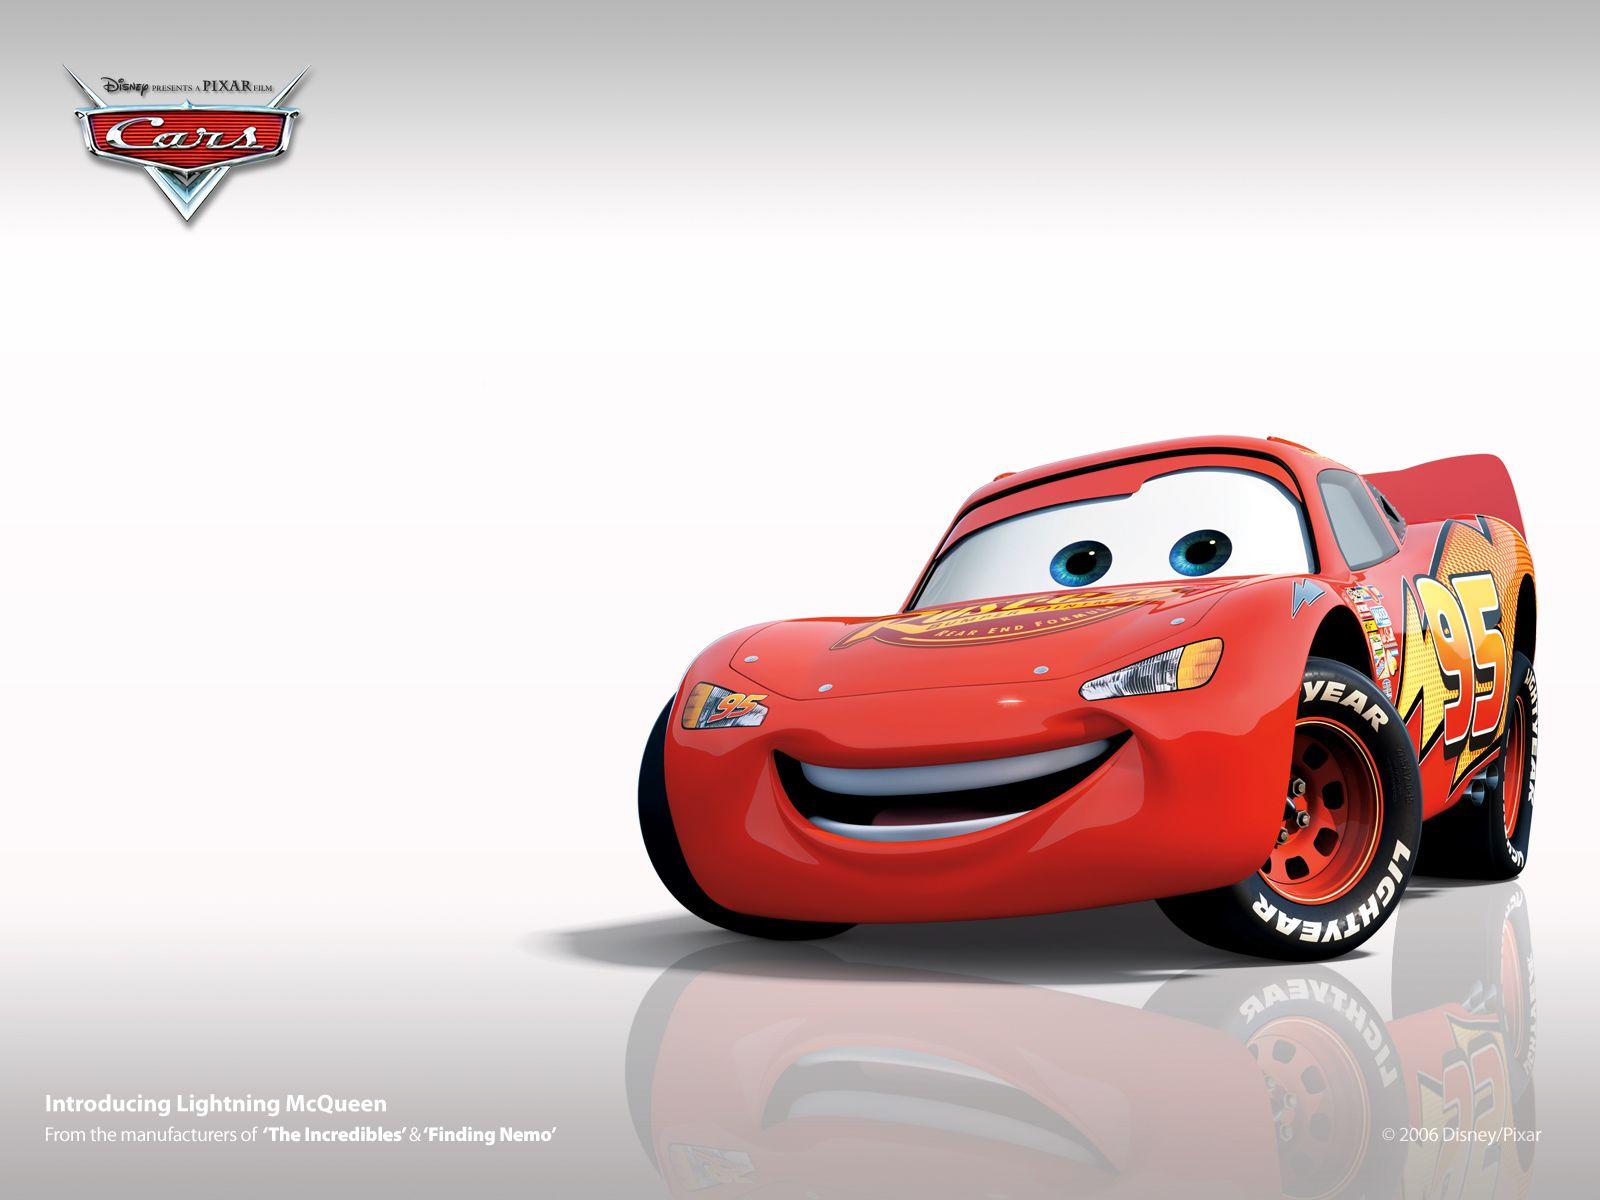 Jimmy Here: cars film background